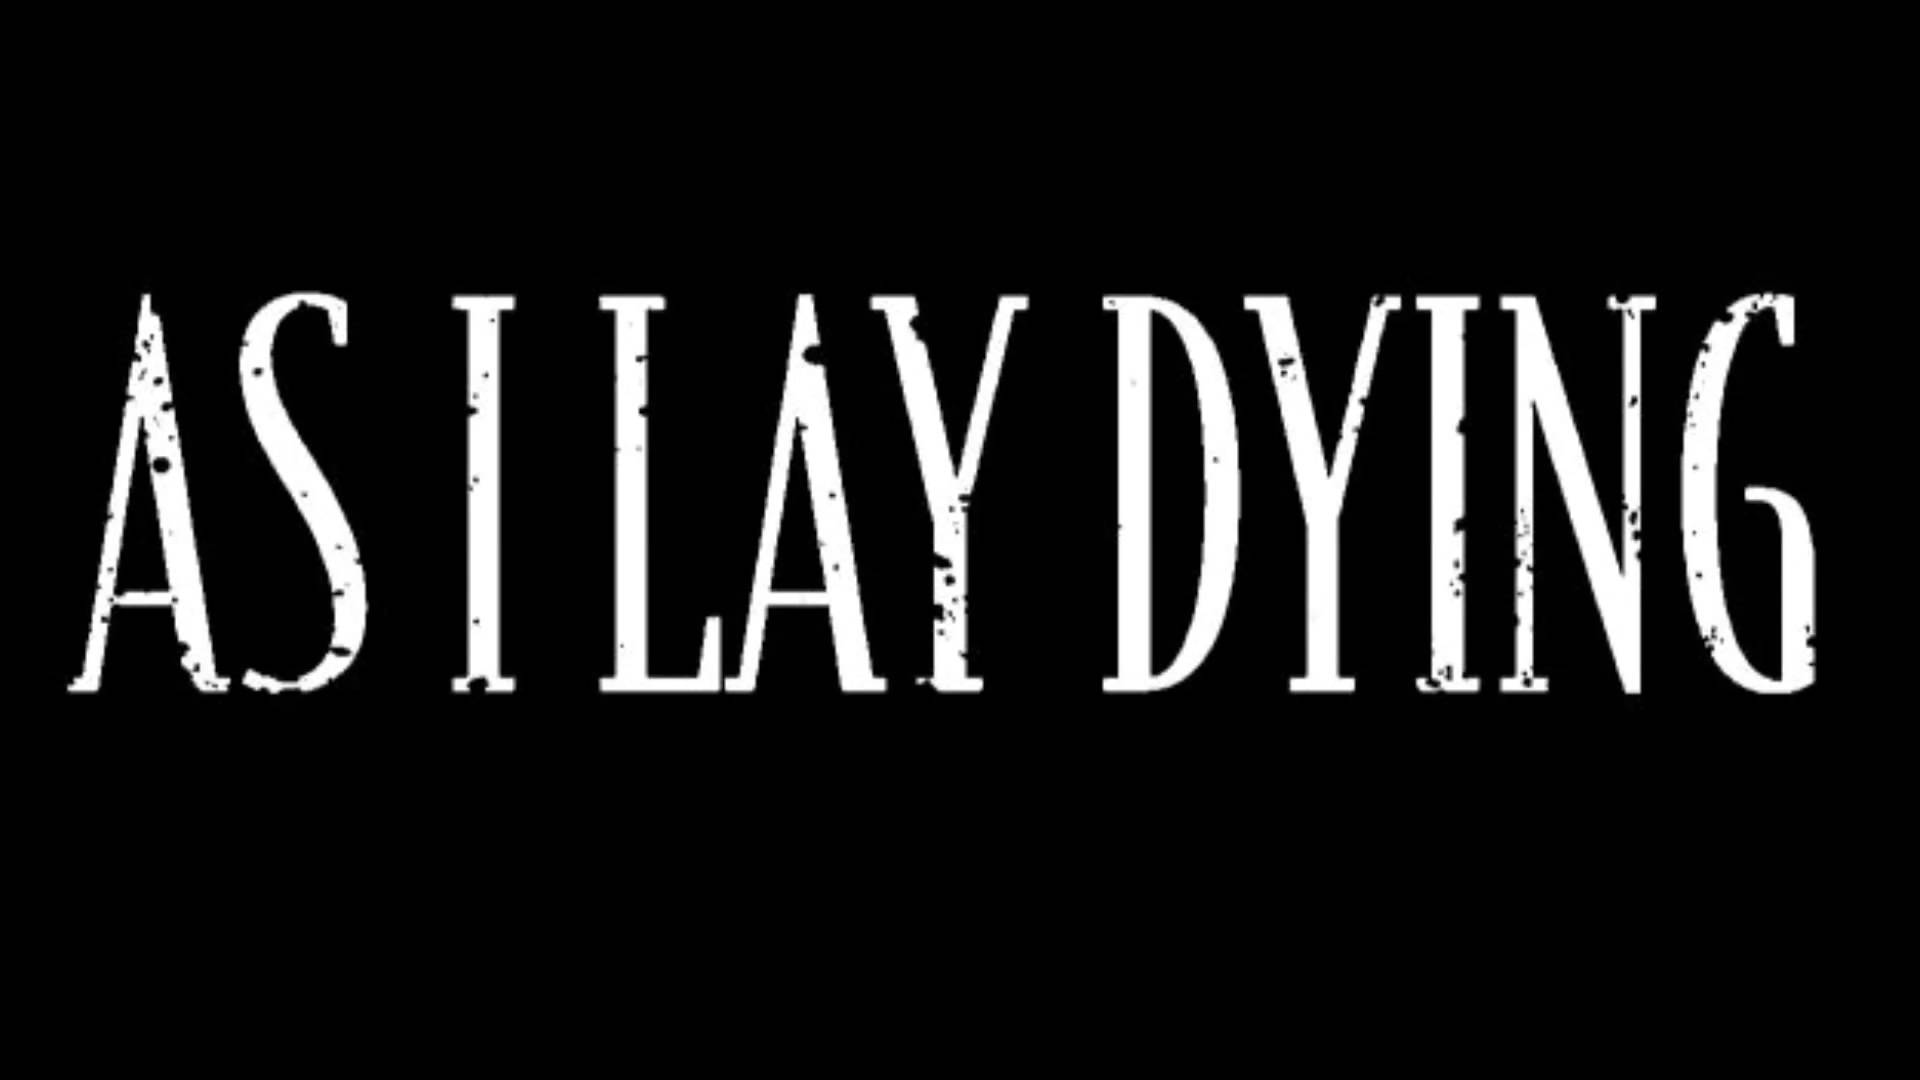 As I Lay Dying #4